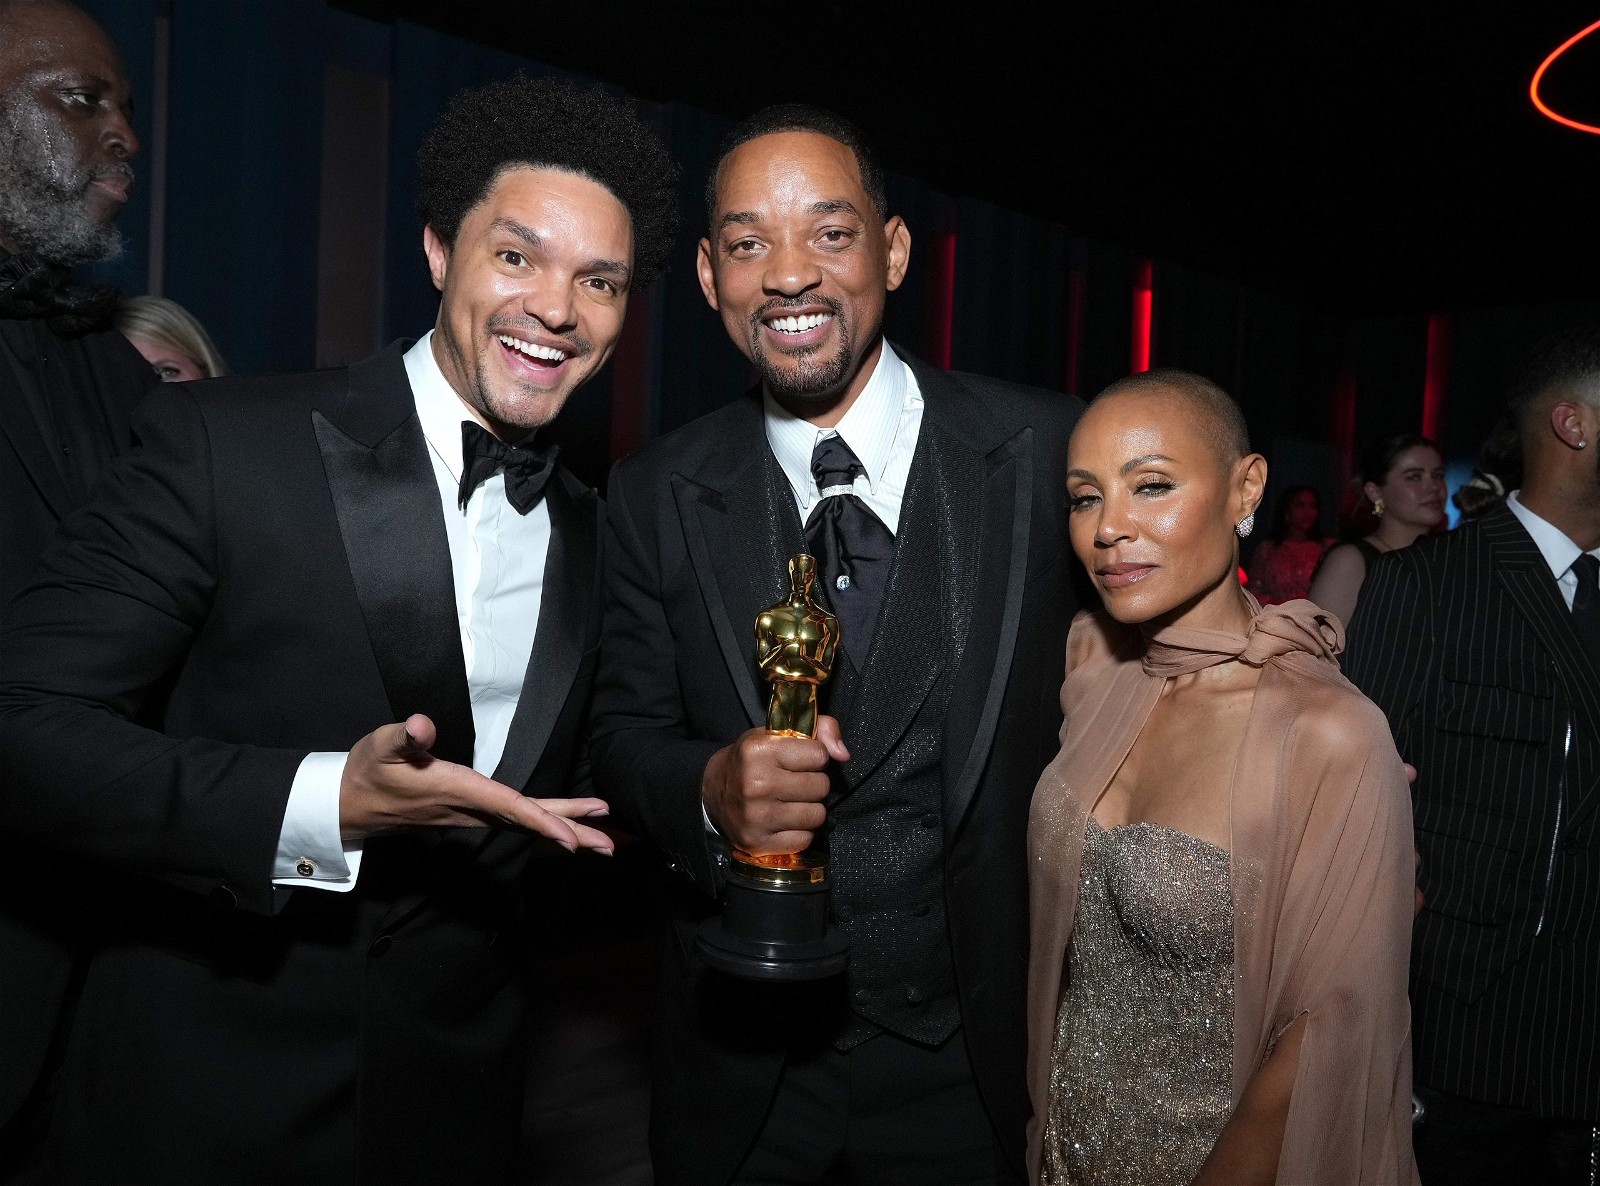 Trevor Noah with Will and Jada Smith at the 94th Oscars